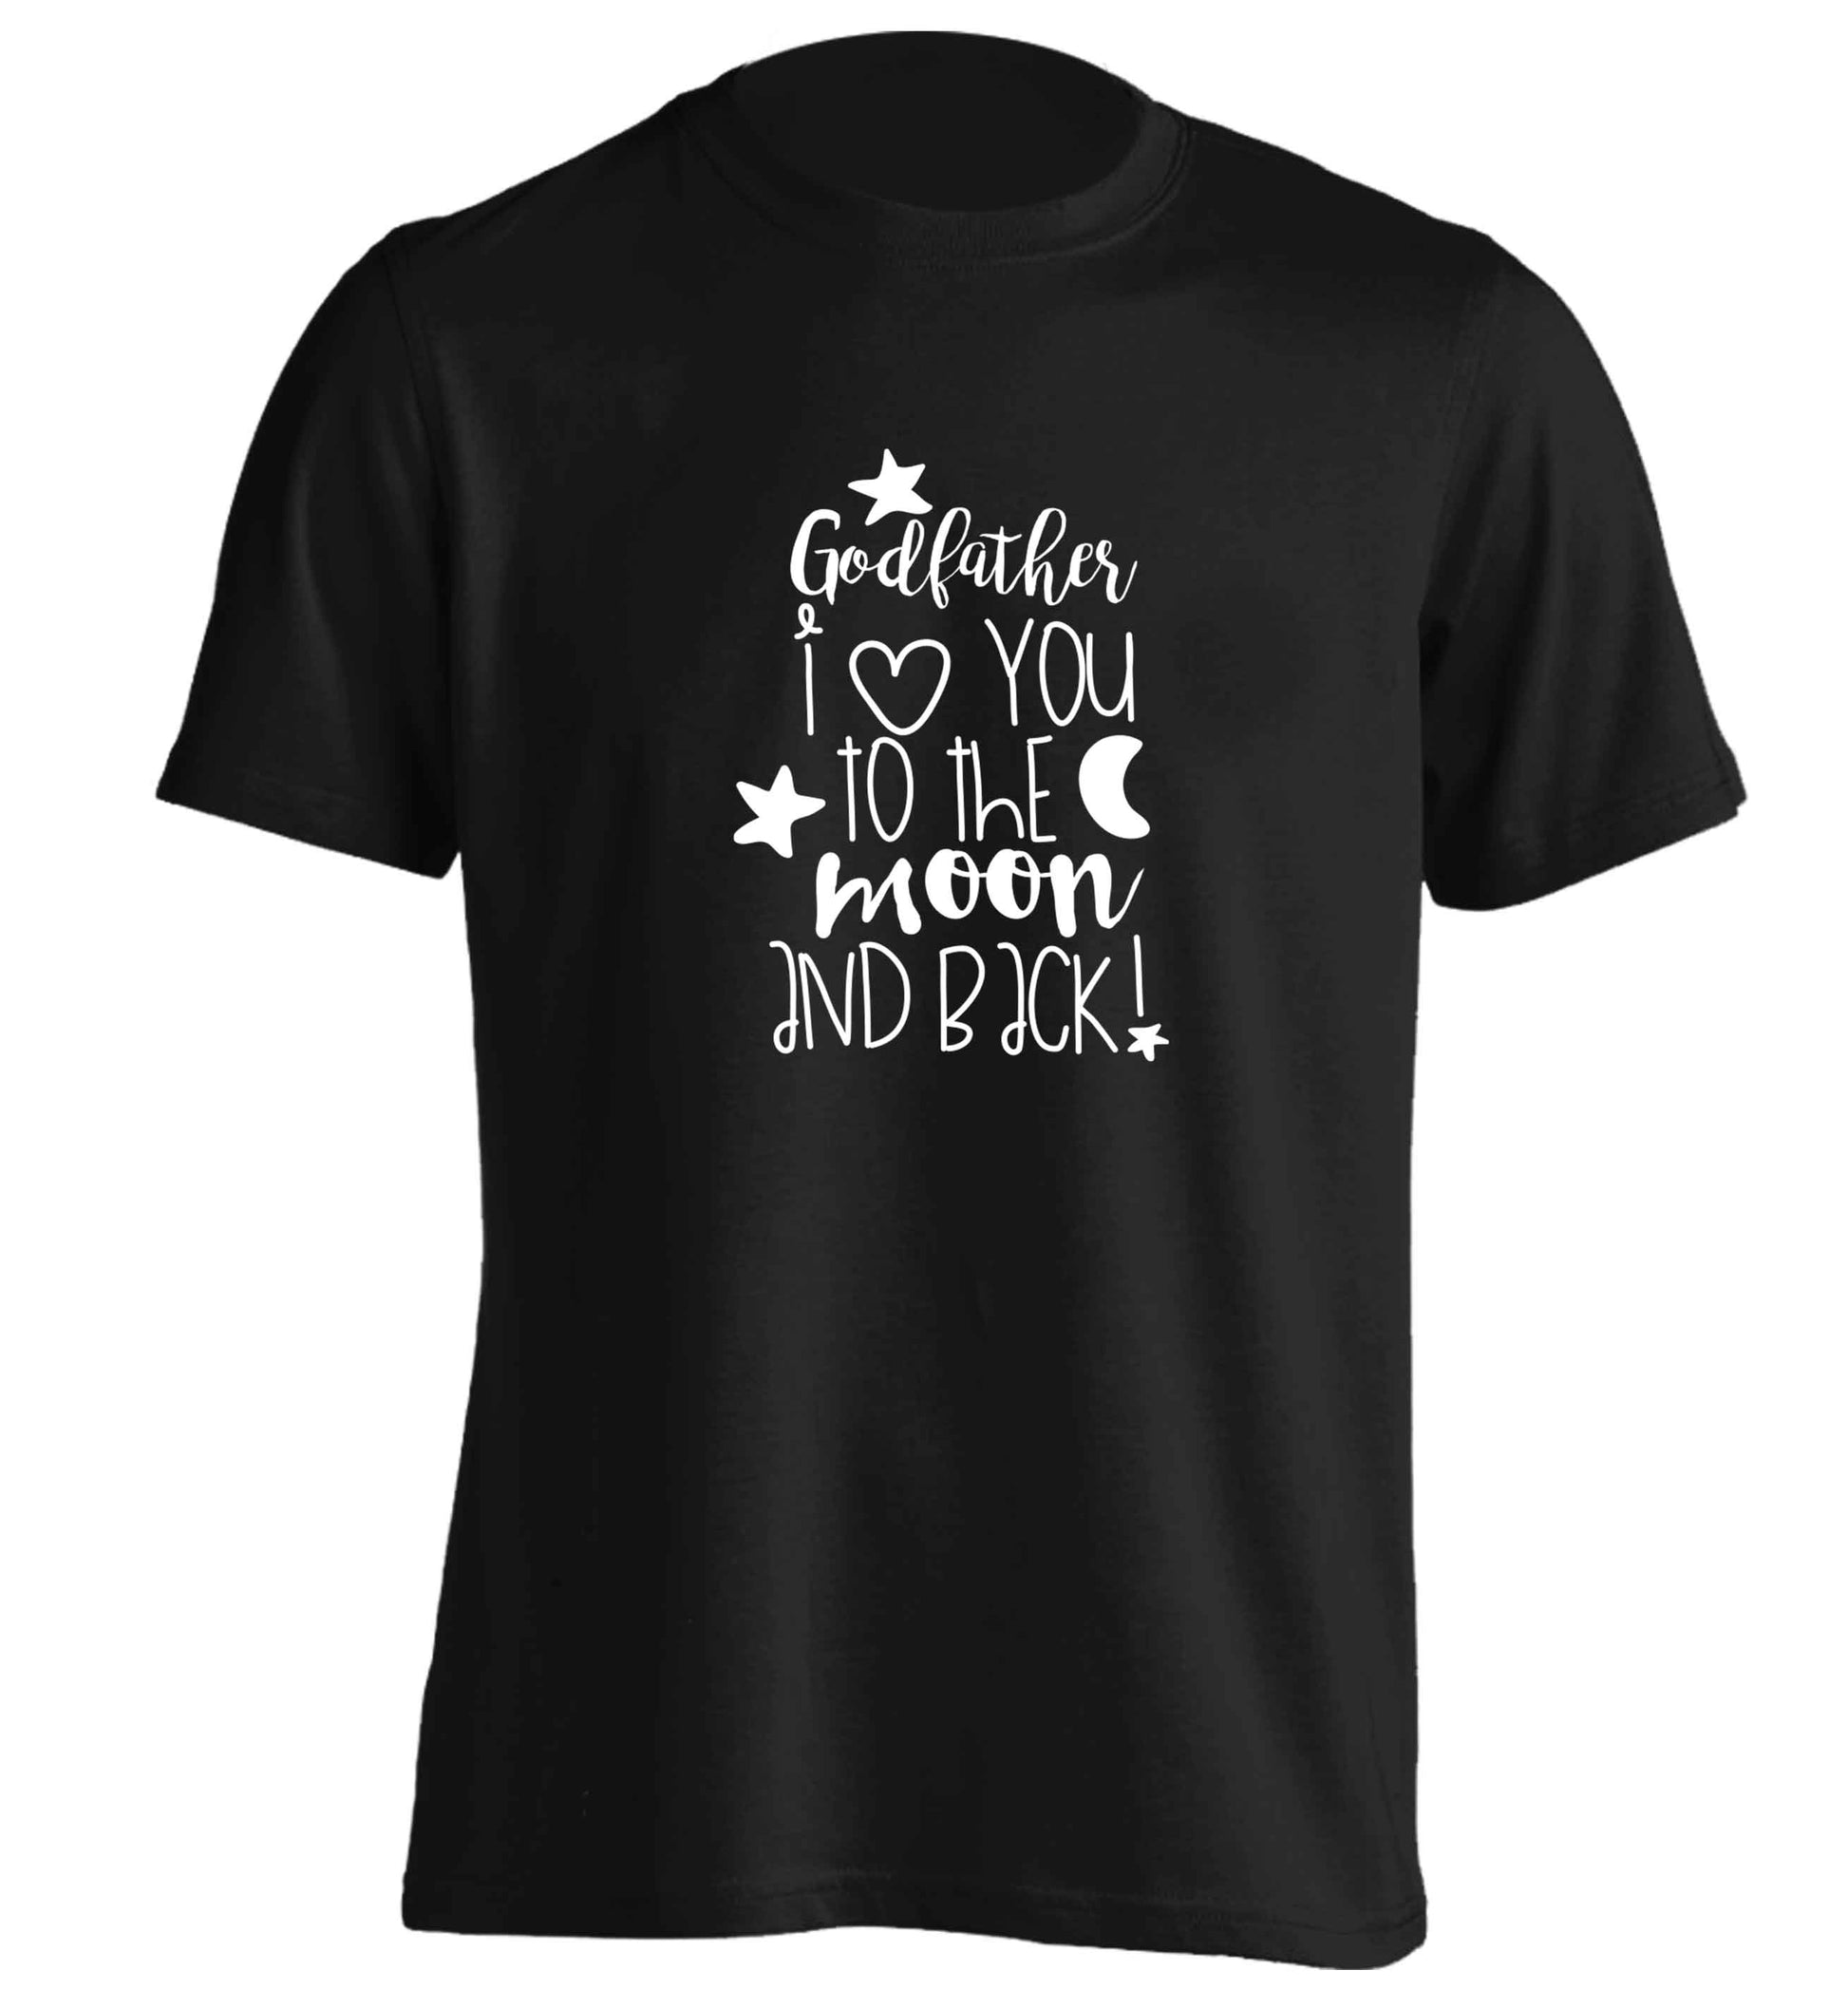 Godfather I love you to the moon and back adults unisex black Tshirt 2XL